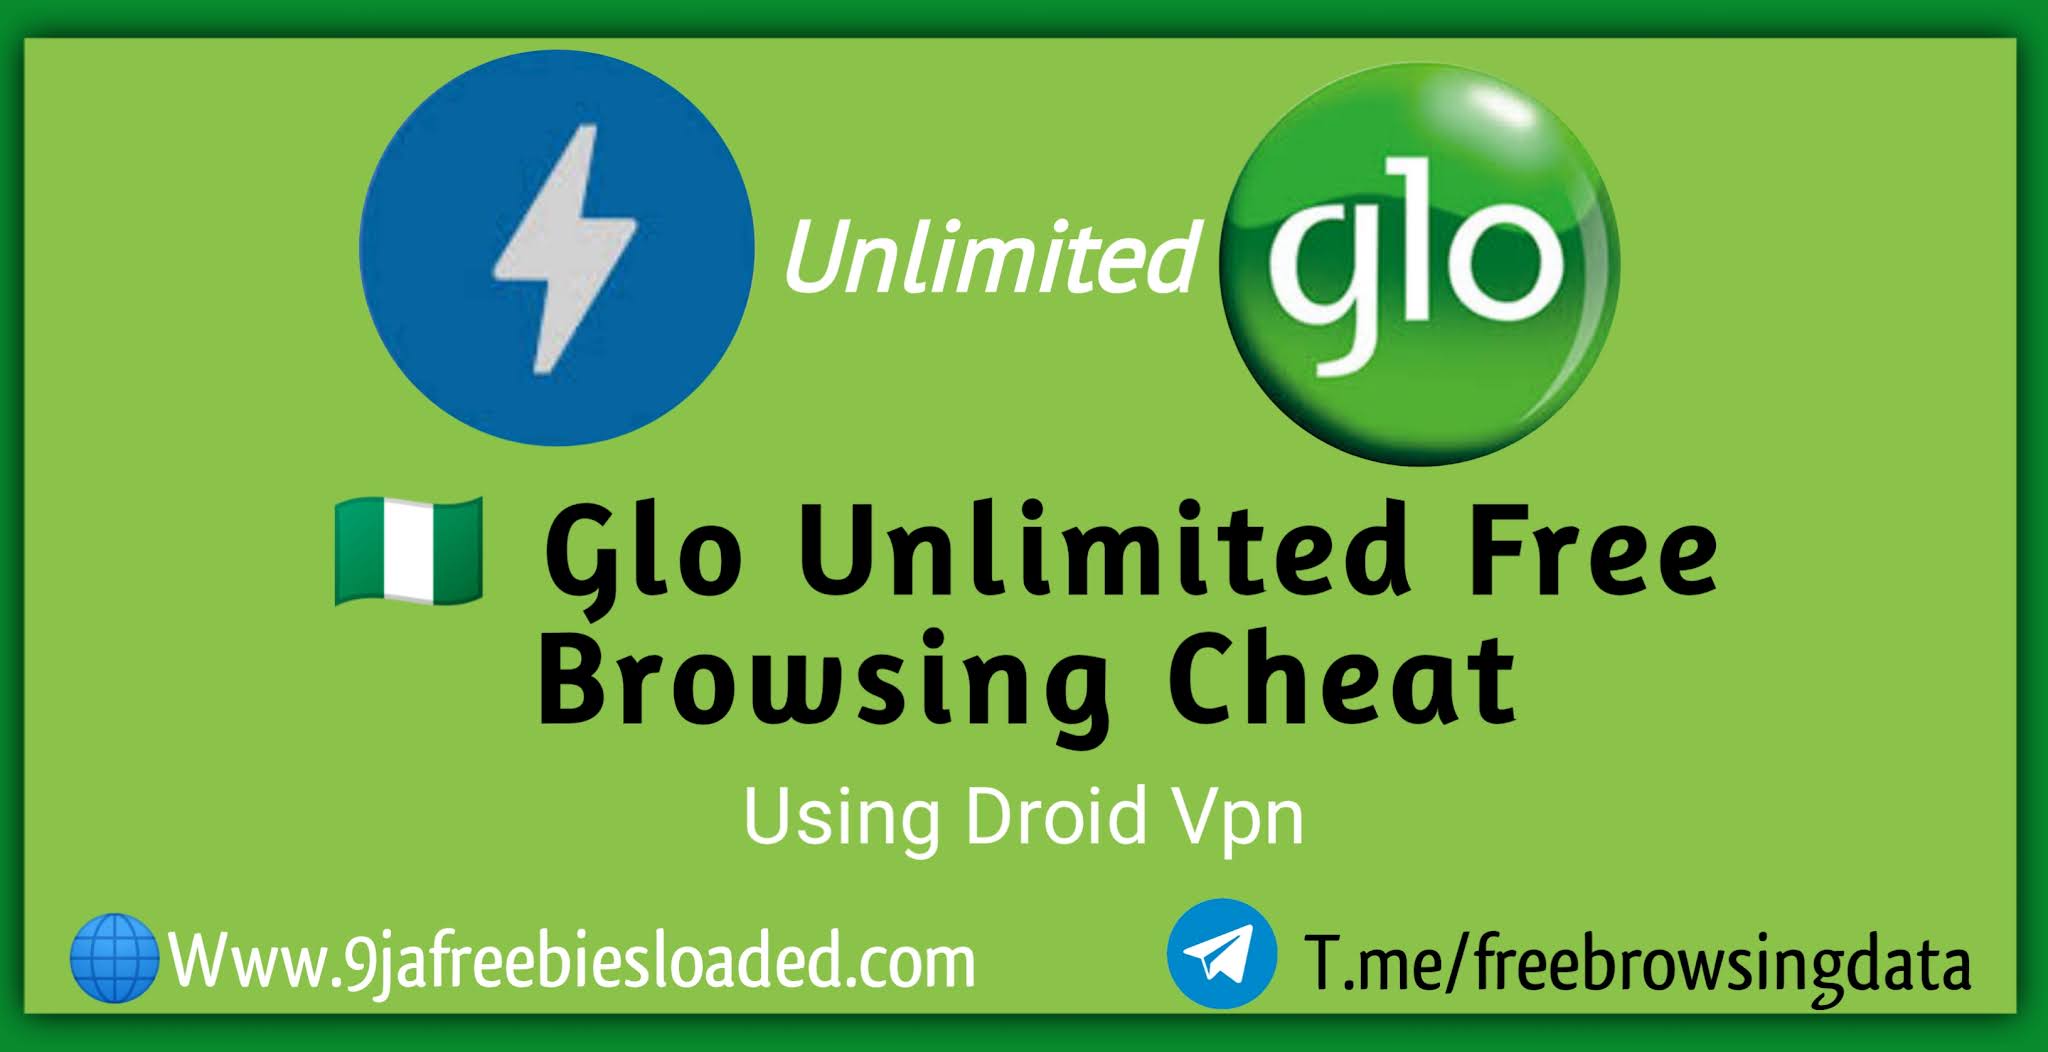 How To Activate Glo Unlimited Free Browsing Cheat Using Droid VPN - July